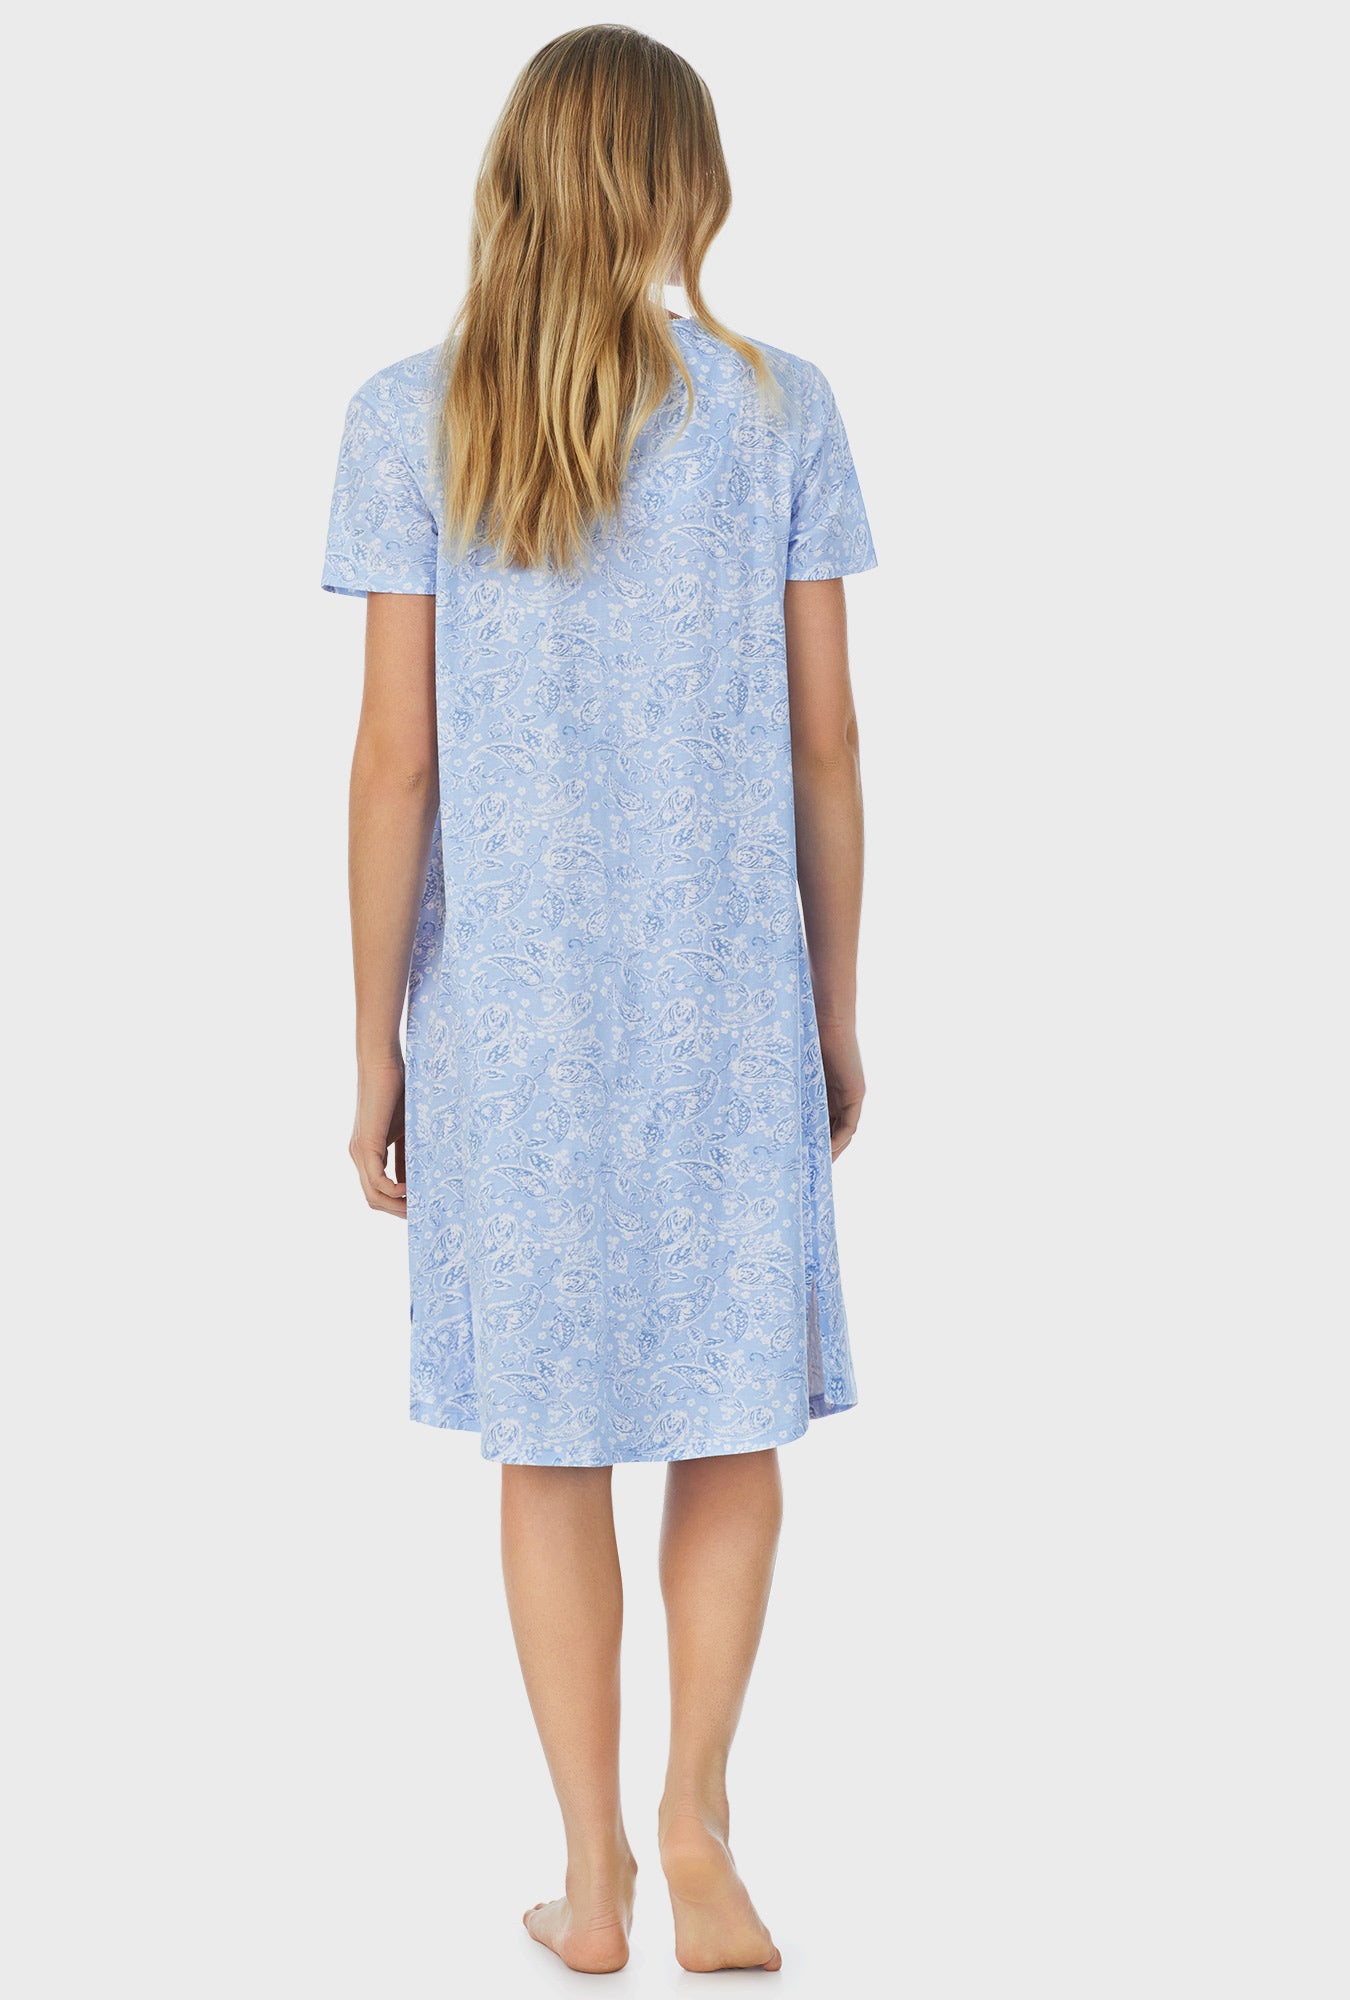 A lady wearing blue short sleeve waltz nightgown with blooming paisley print.